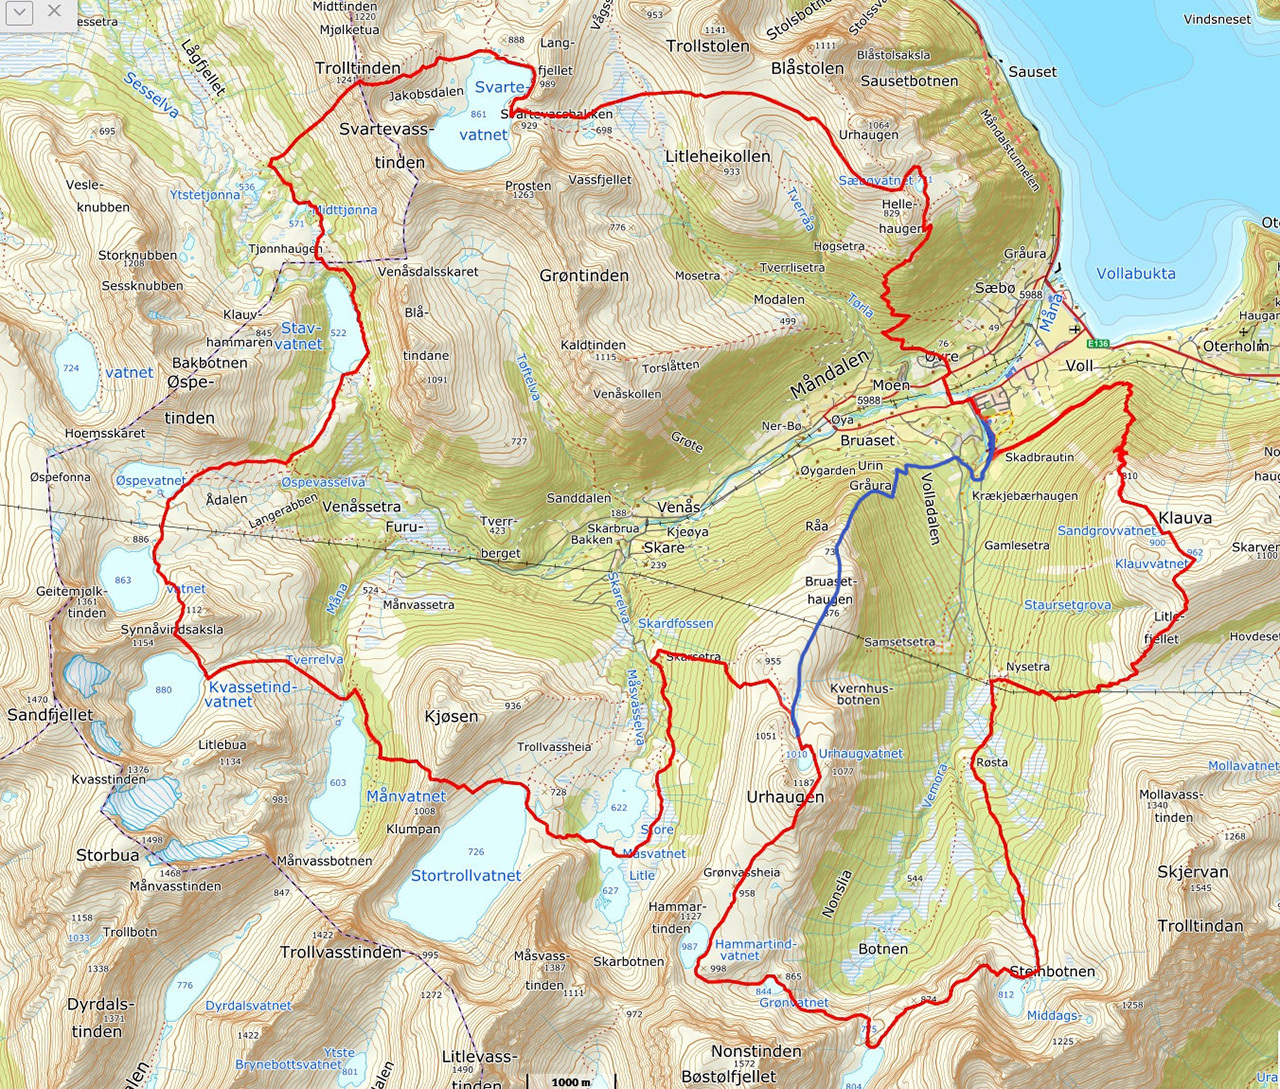 MVRF 7-17 Lakes with blue and red drawn.jpg